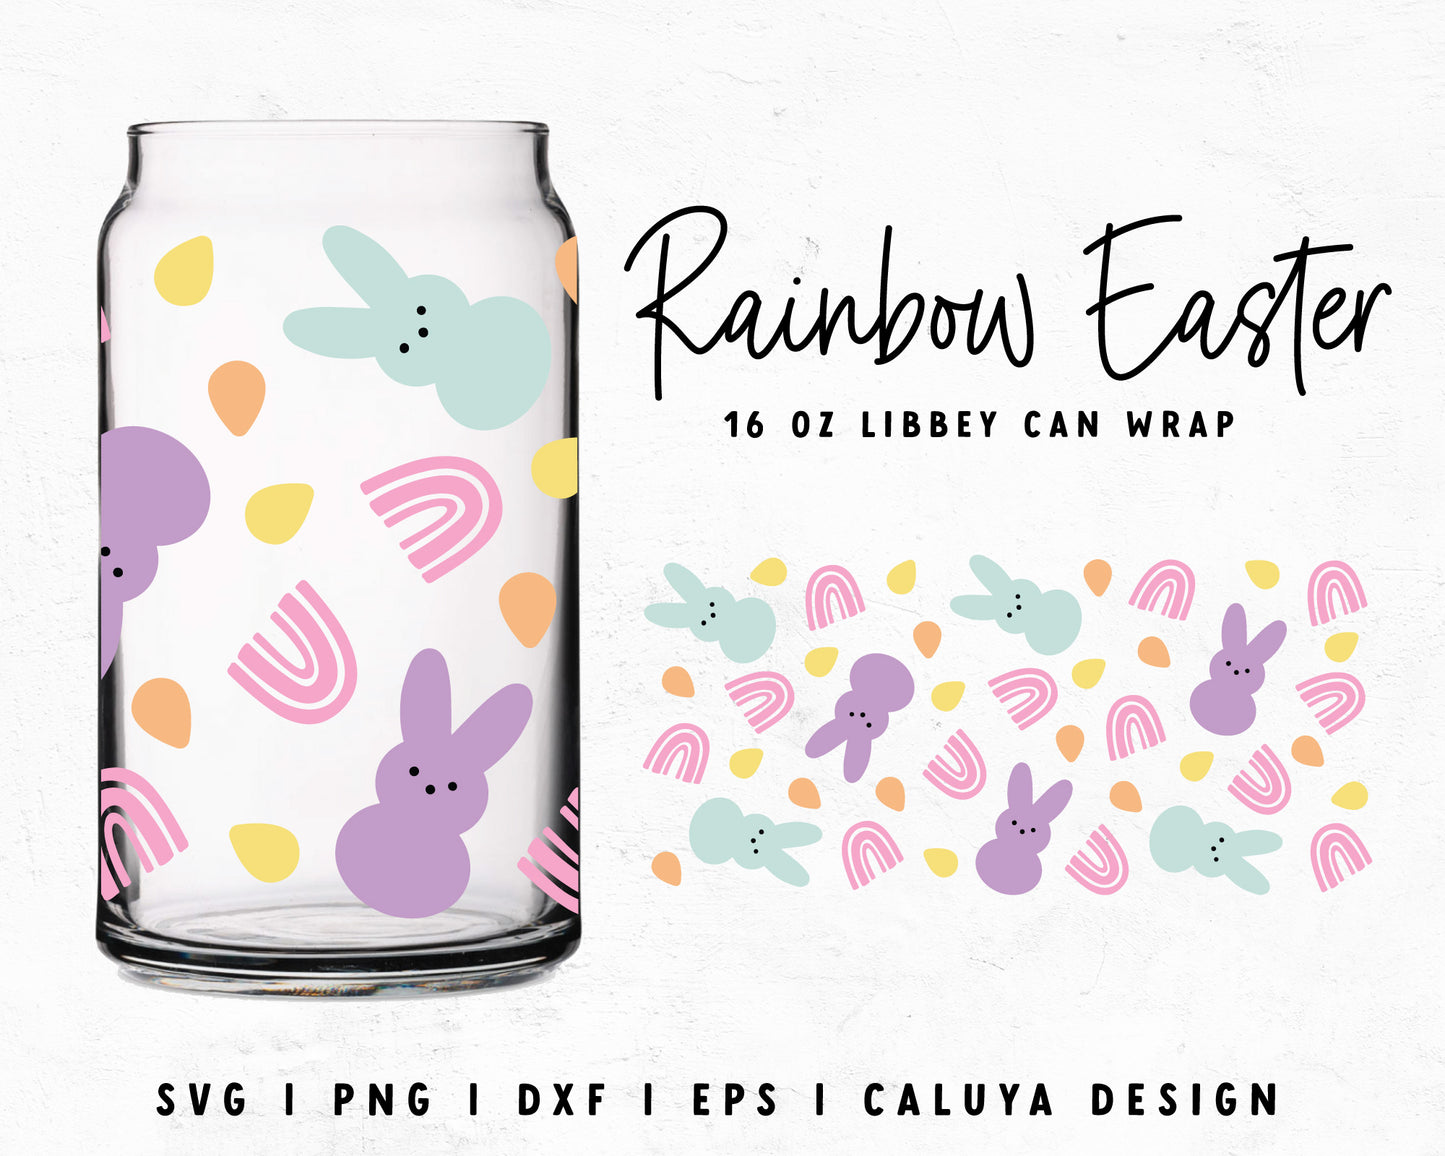 16oz Libbey Can Rainbow & Easter Bunny Cup Wrap Cut File for Cricut, Cameo Silhouette | Free SVG Cut File